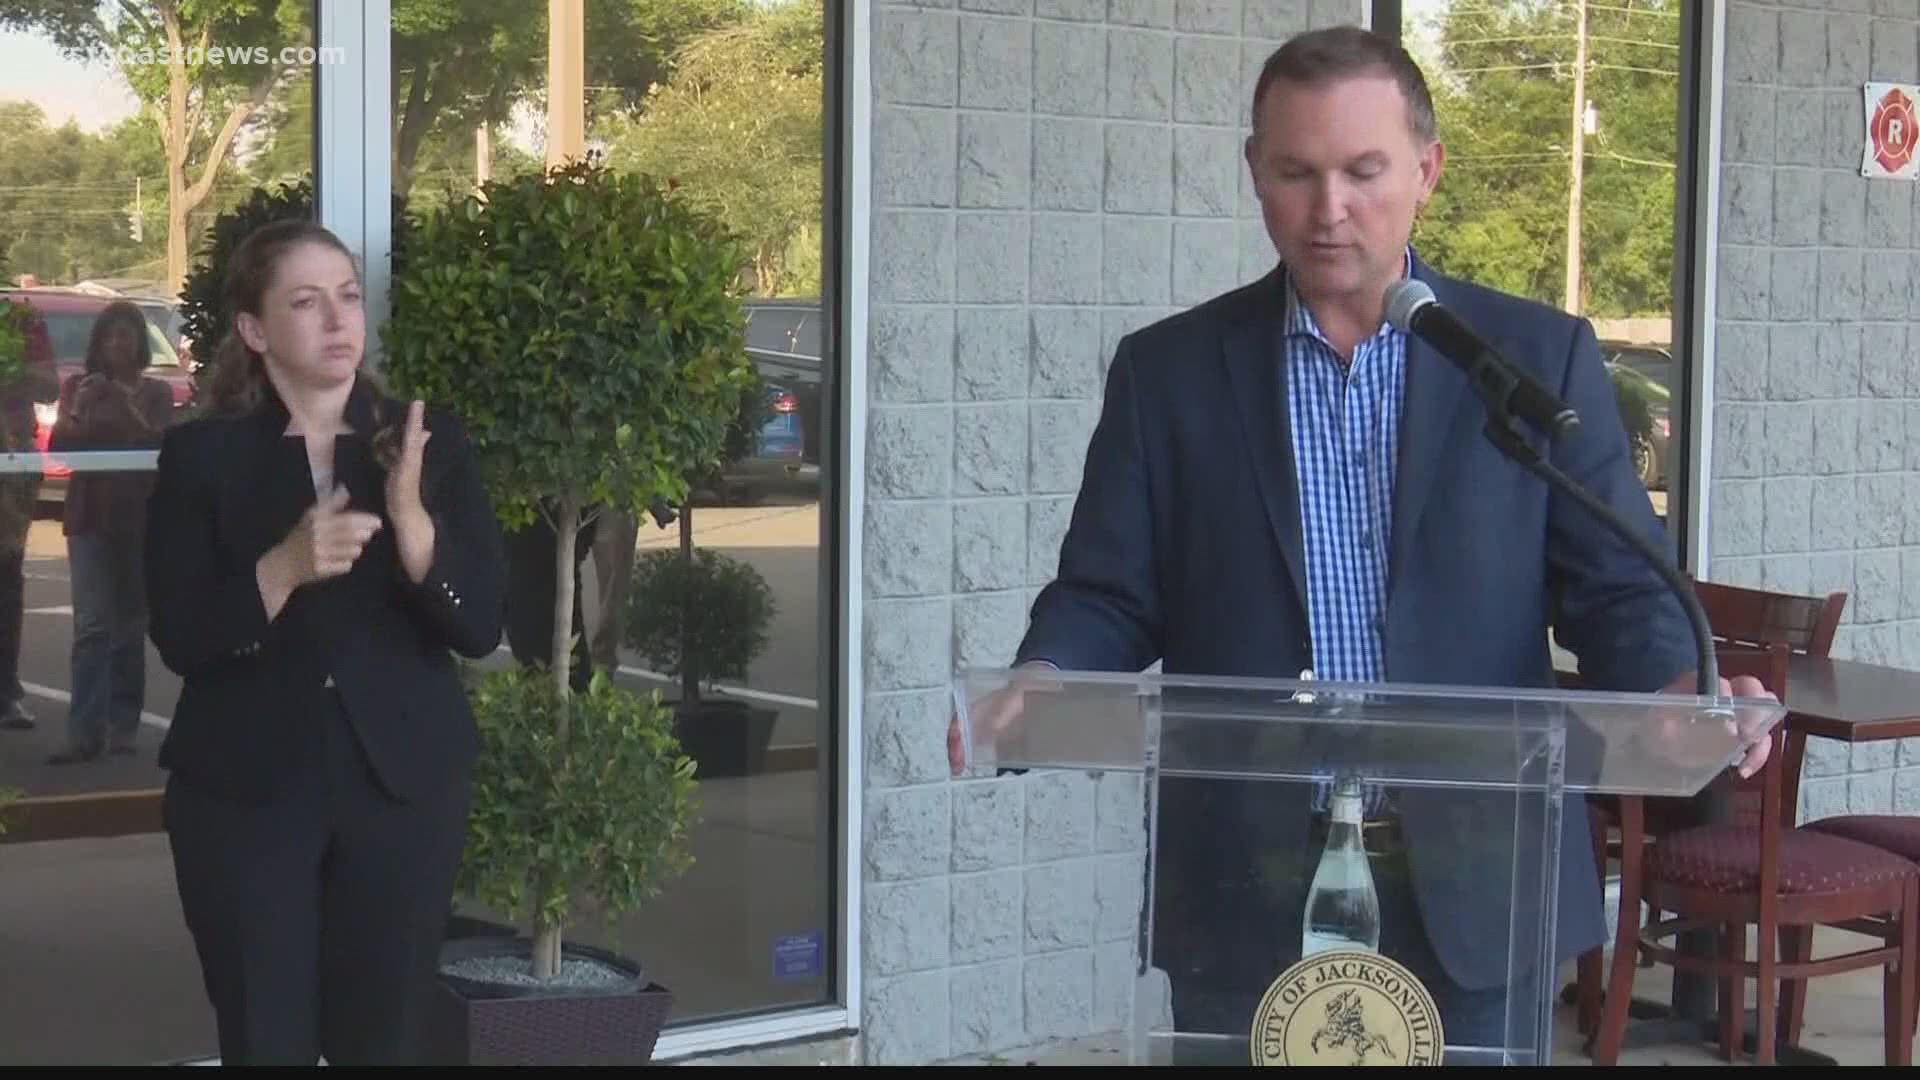 Mayor Lenny Curry discussed the start of phase one in Florida’s reopening plan, highlighting restaurants and public buildings.